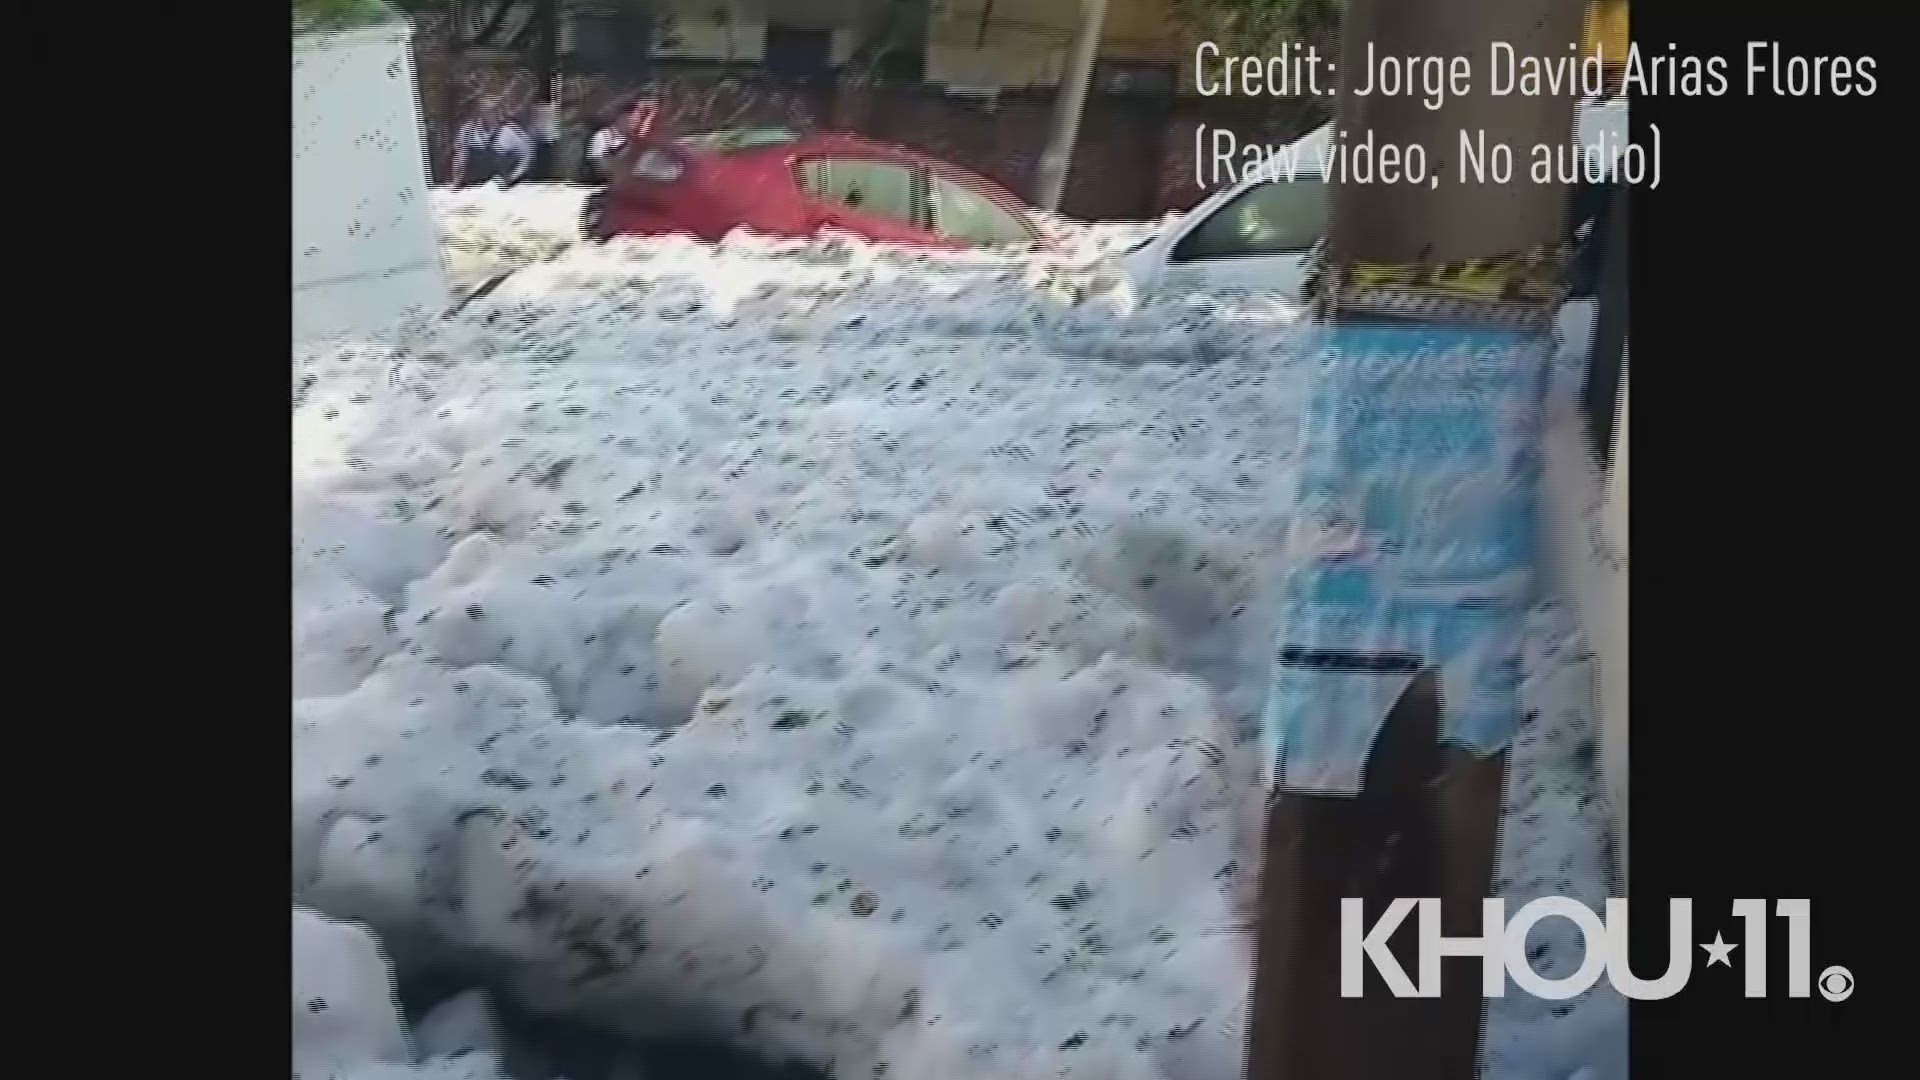 A bizarre hailstorm left a Mexican city buried in up to six feet of ice -- in the middle of summer on Sunday, June 30, 2019. The unusual weather event in Guadalajara damaged homes and cars, but there were no reports of injuries.